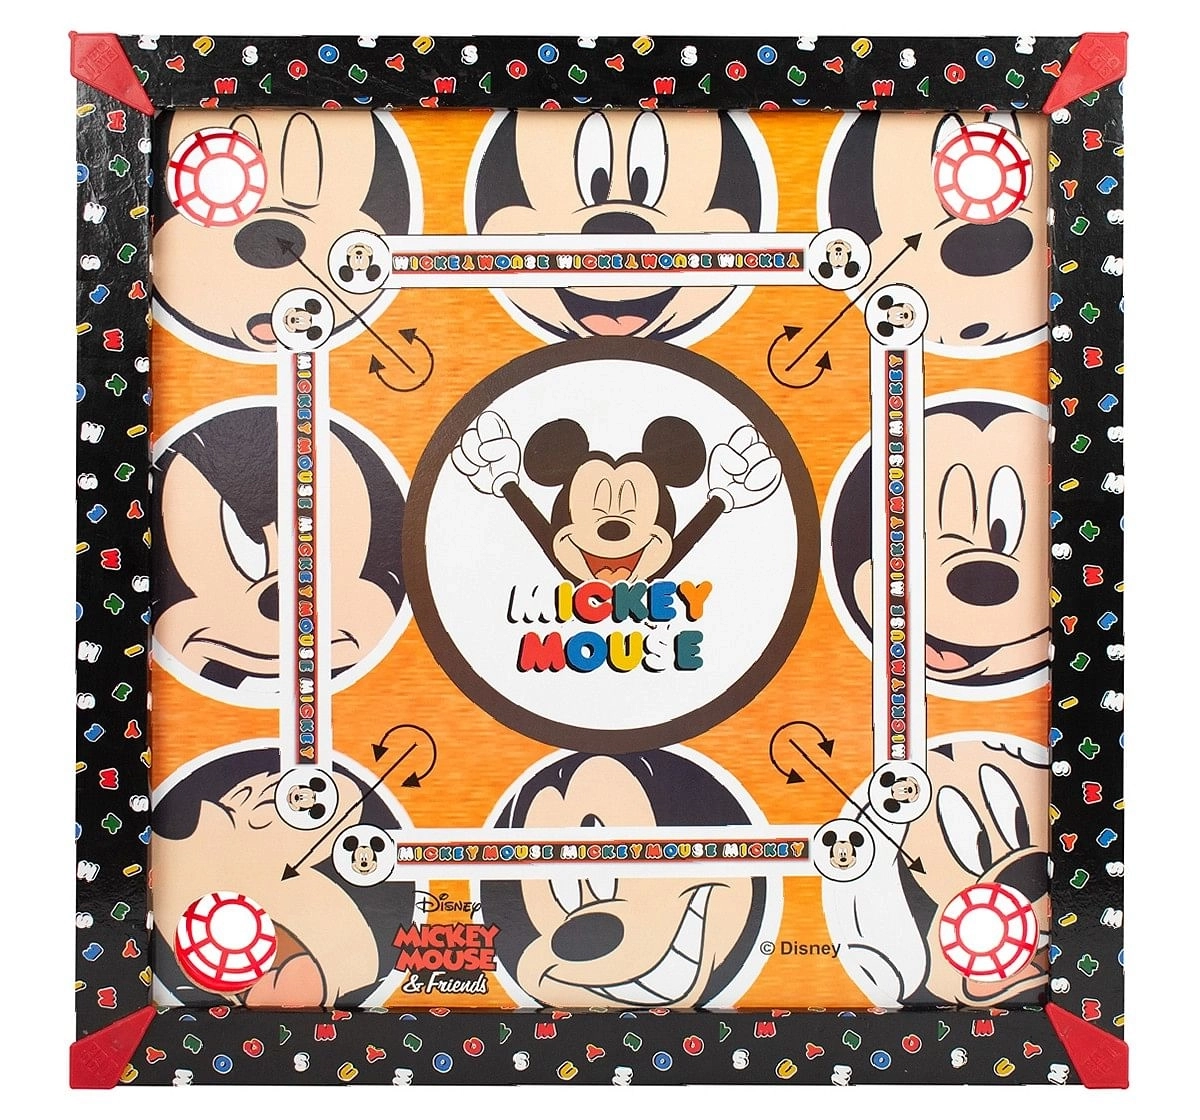 IToys Disney Mickey mouse carrom for kids (20X20), Assorted, Unisex, 4Y+(Multicolour)